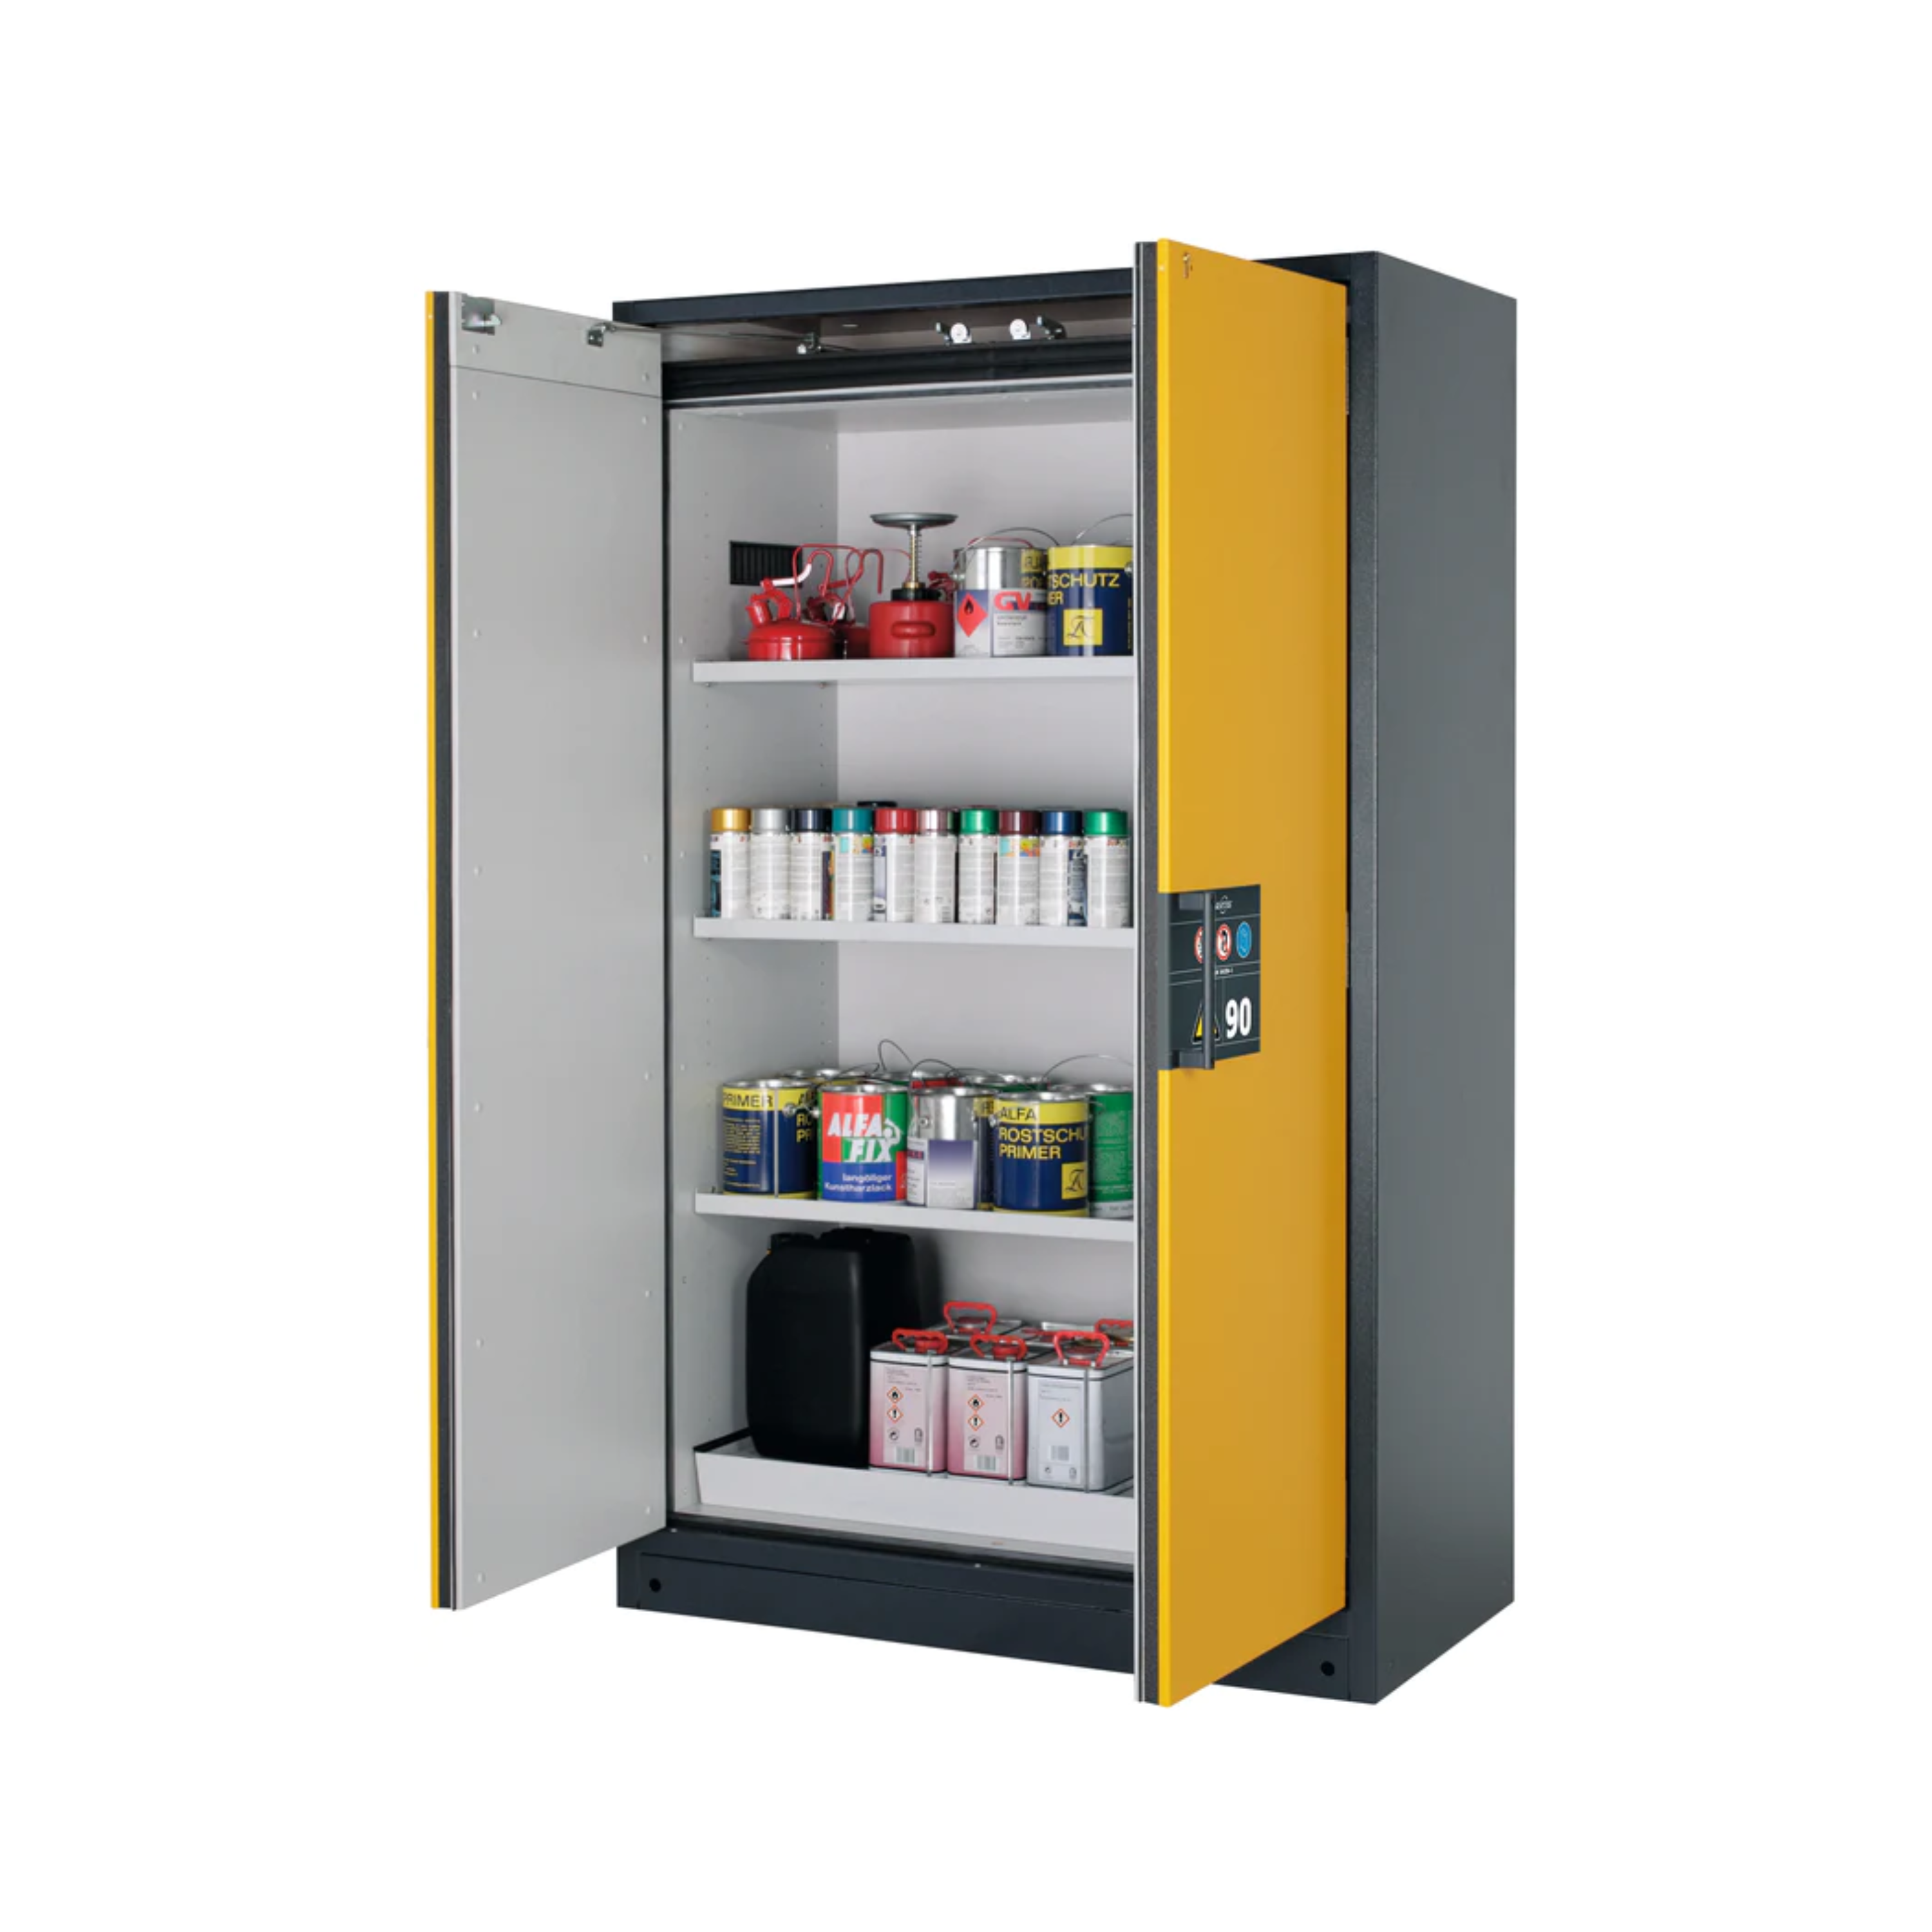 Type 90 safety storage cabinet Q-CLASSIC-90 model Q90.195.120 in warning yellow RAL 1004 with 3x shelf standard (sheet steel),